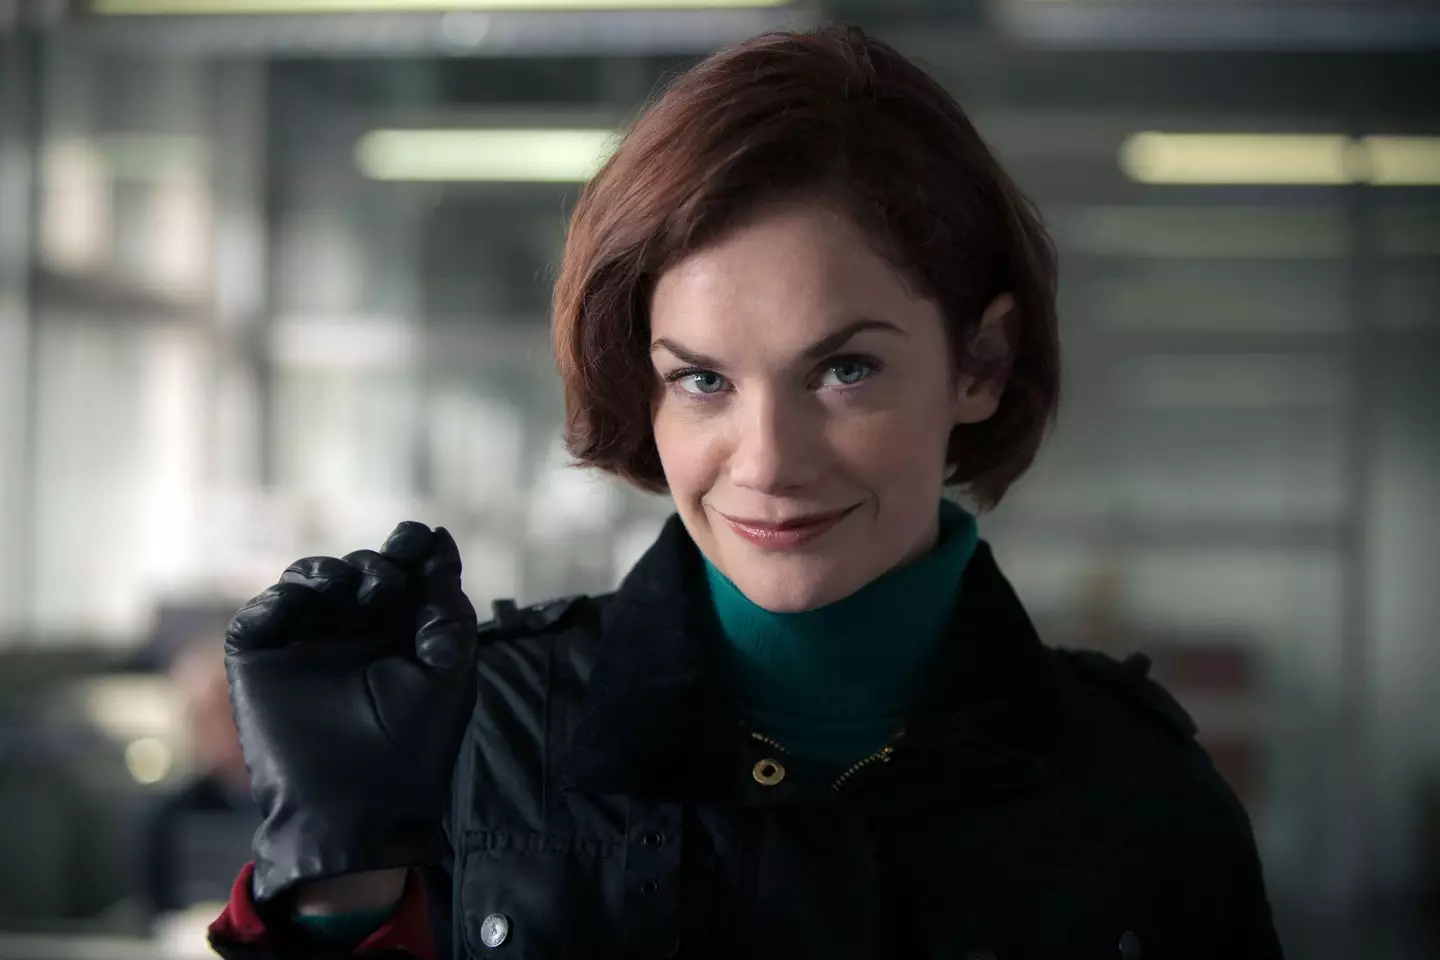 Actor Ruth Wilson refused to confirm whether her character has died.